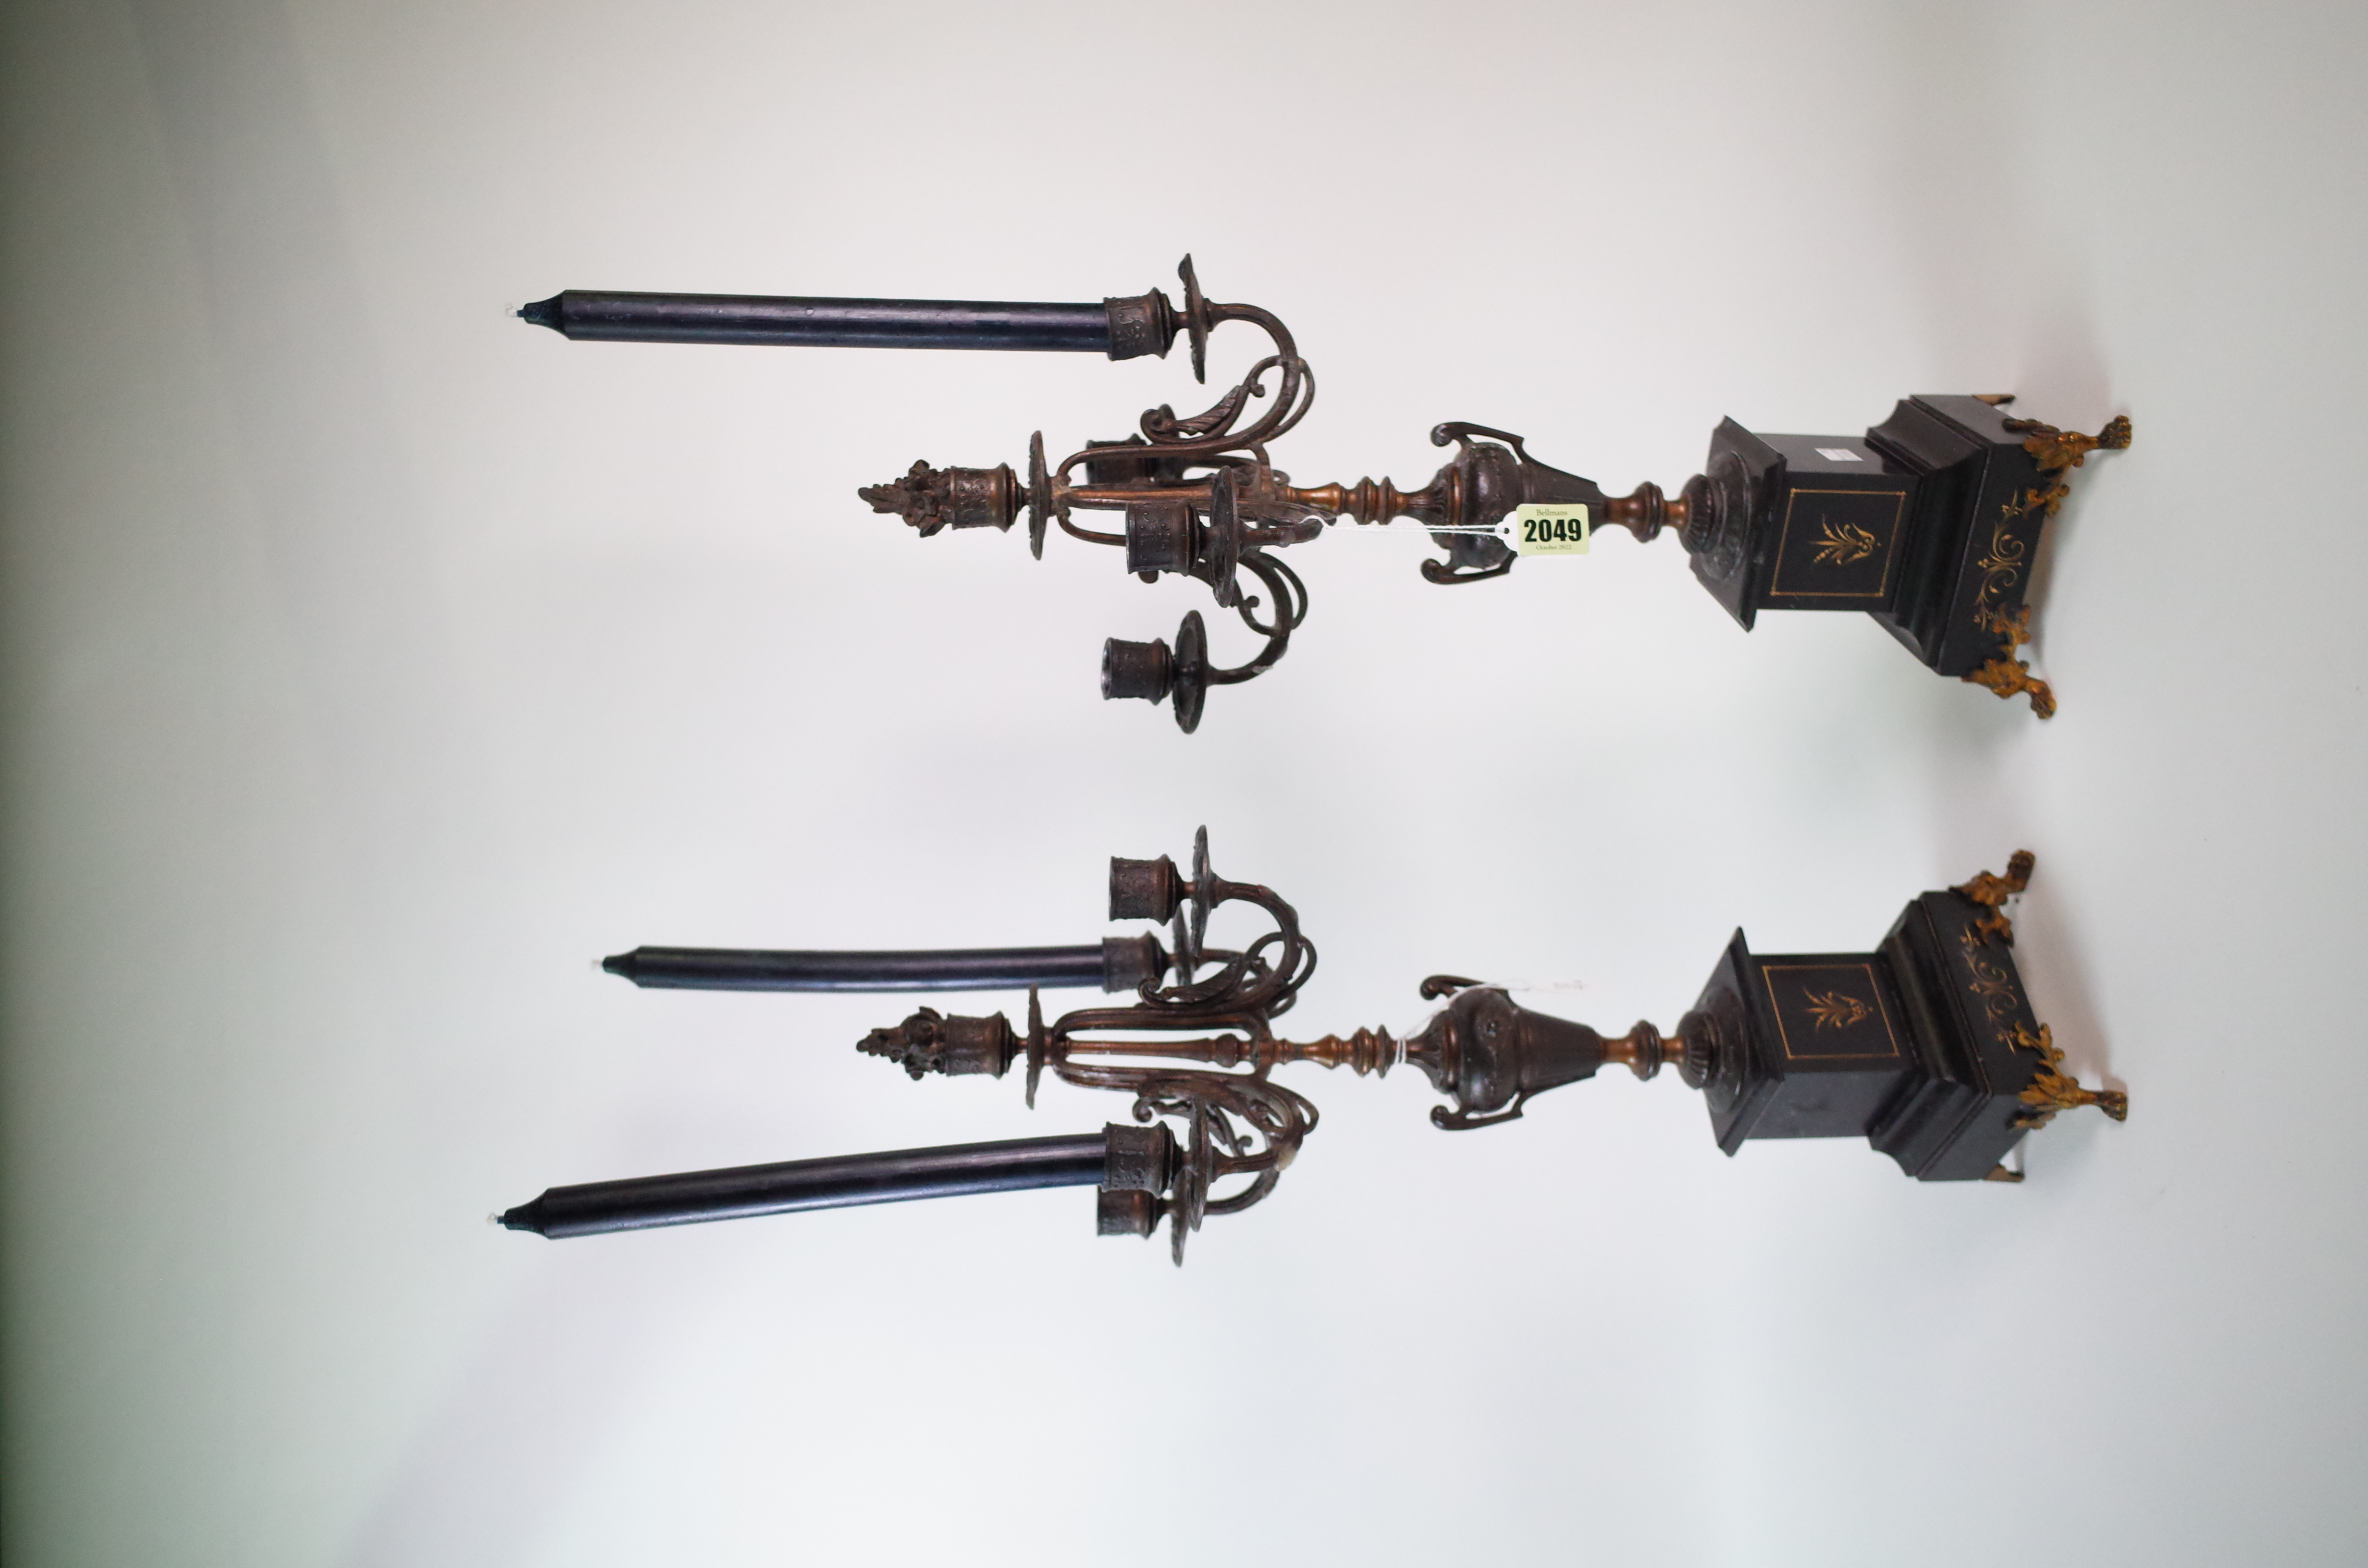 A PAIR OF VICTORIAN MARBLE AND BRONZE FOUR BRANCH CANDELABRA (2)